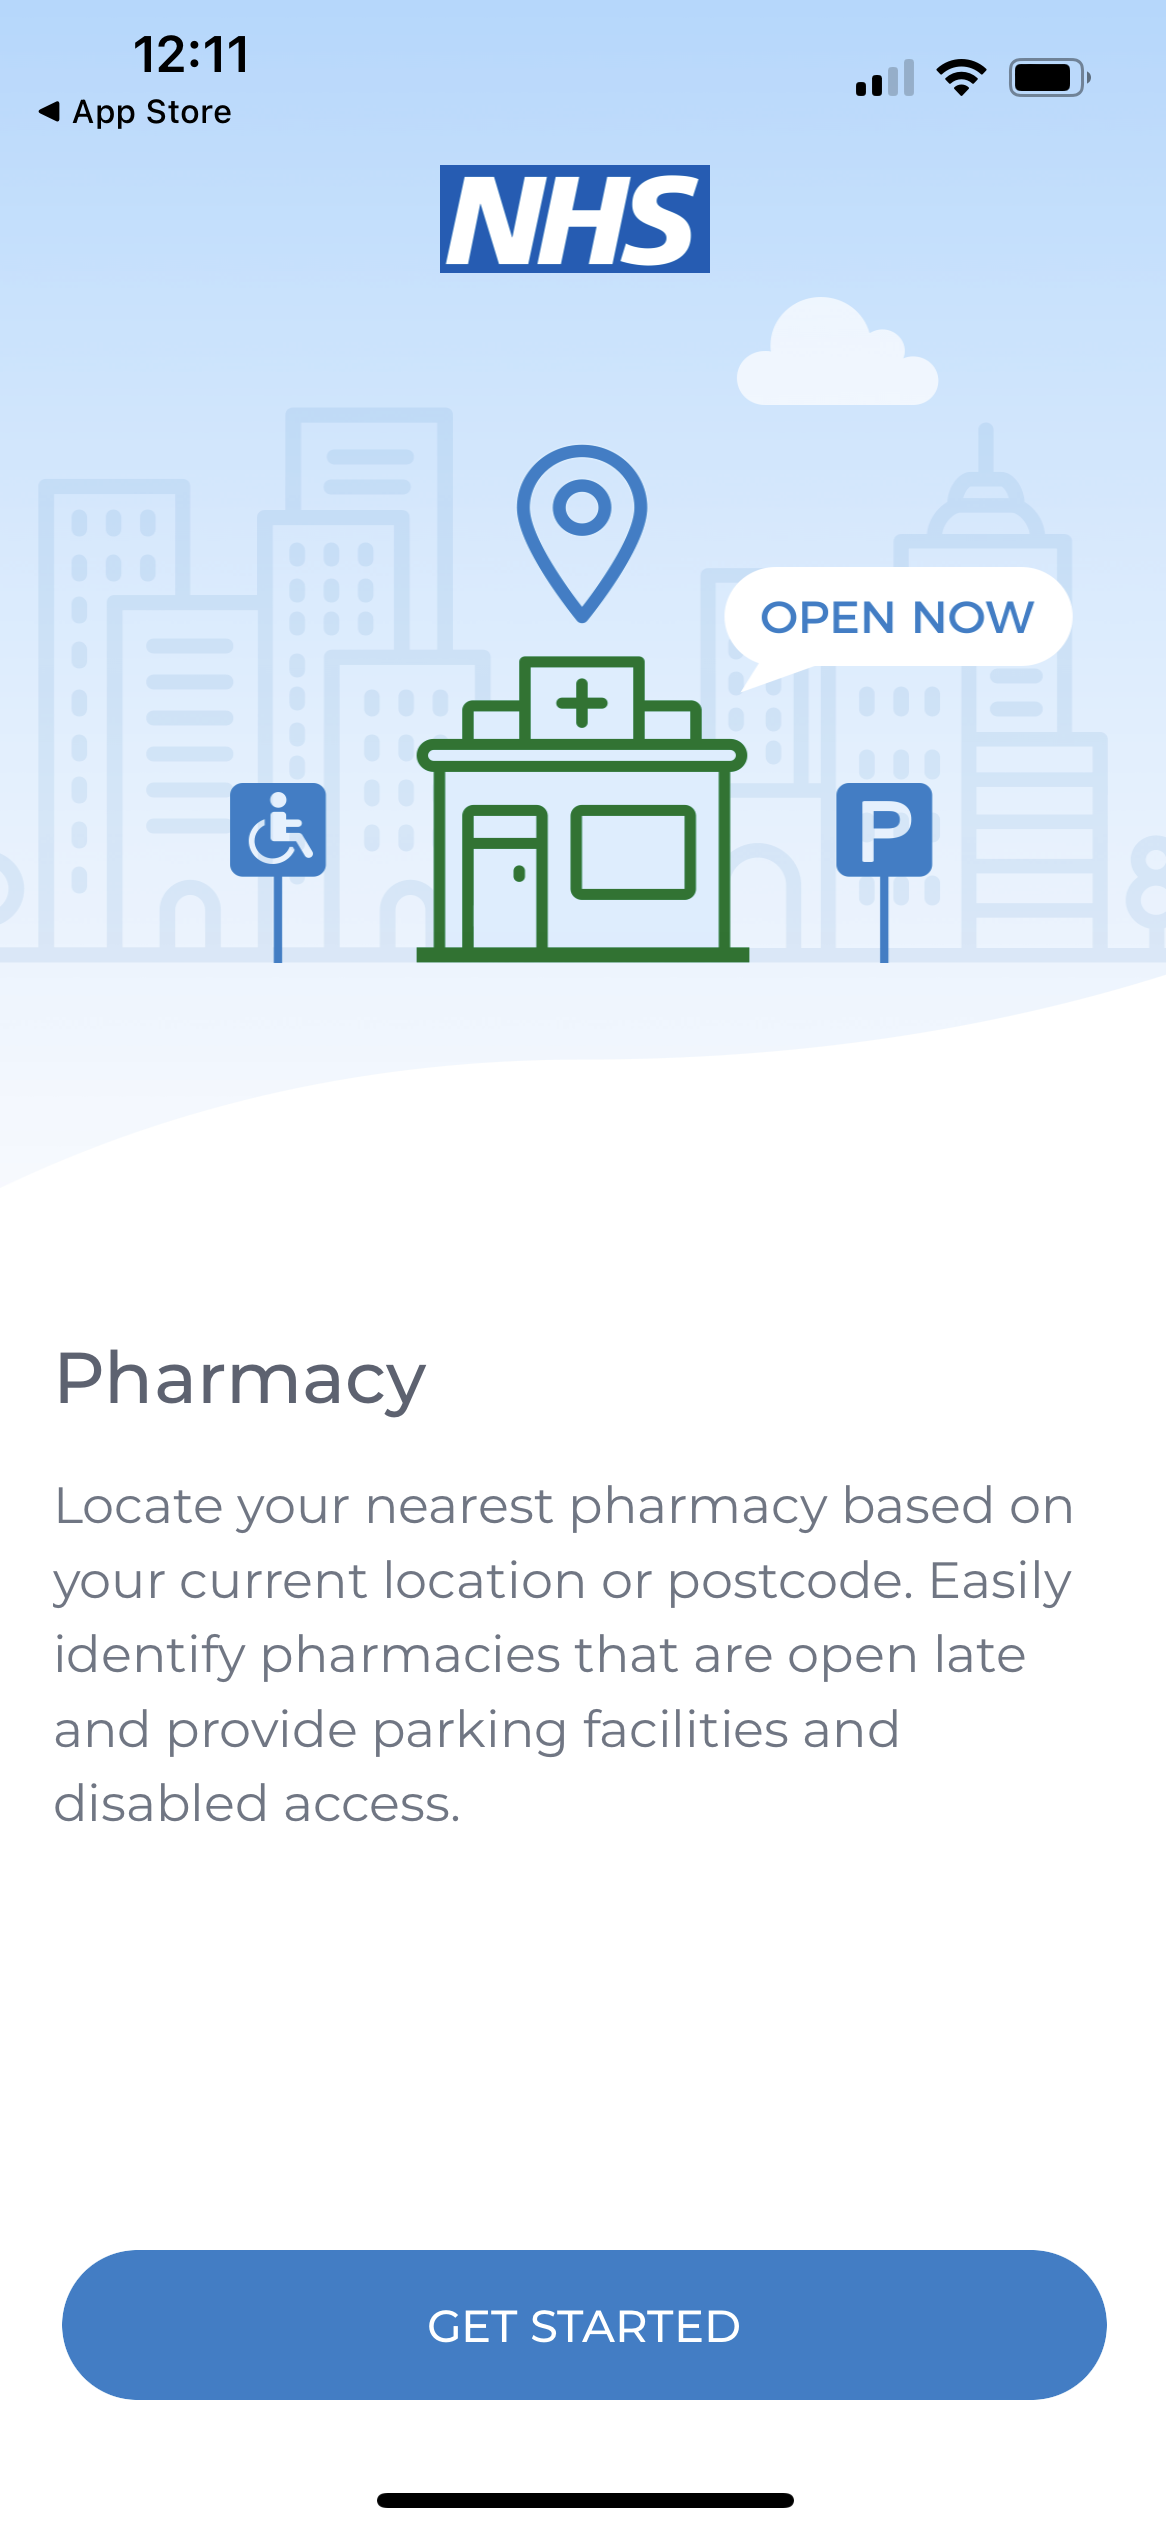 Pharmacy
Locate your nearest pharmacy based on your current location or postcode. Easily identify pharmacies that are open late and provide parking facilities and disabled access.